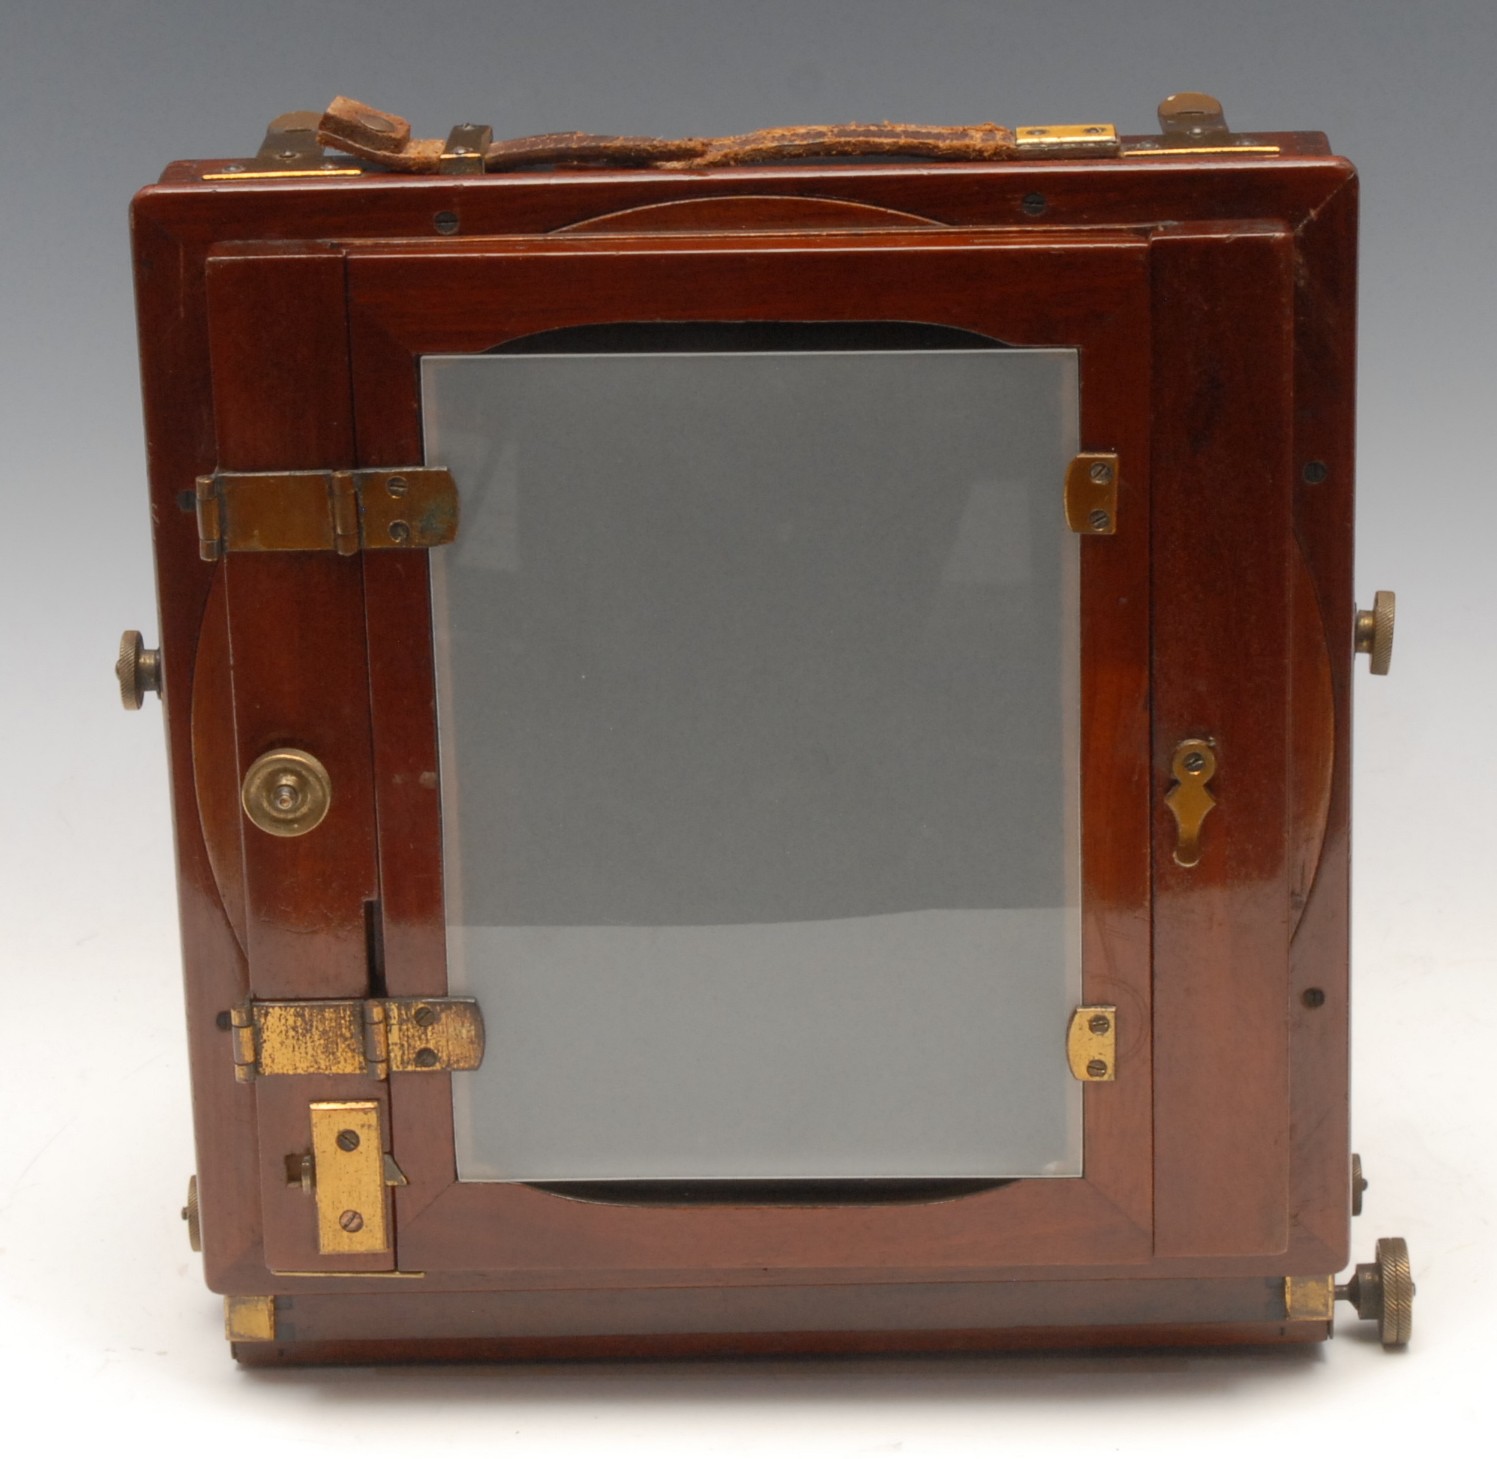 Photography - A W. Butcher & Sons "The National Camera", half-plate folding camera, mahogany body, - Image 4 of 6